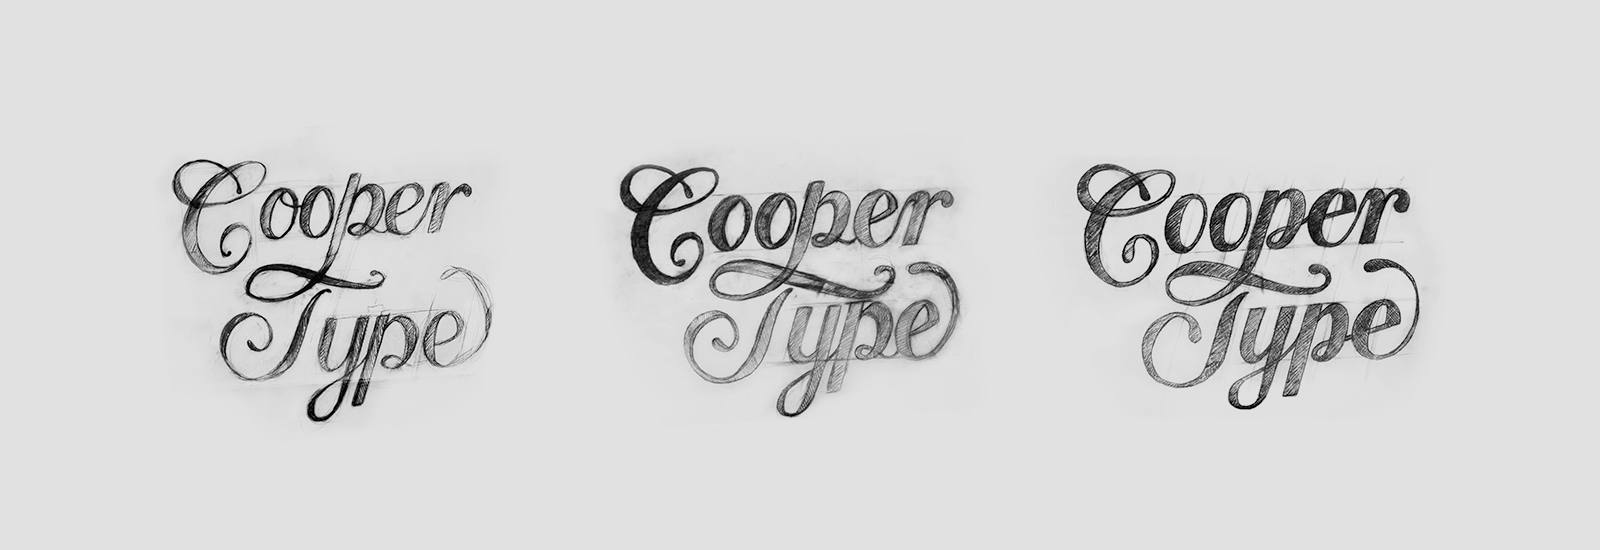 cooper-term1-drawnletters4